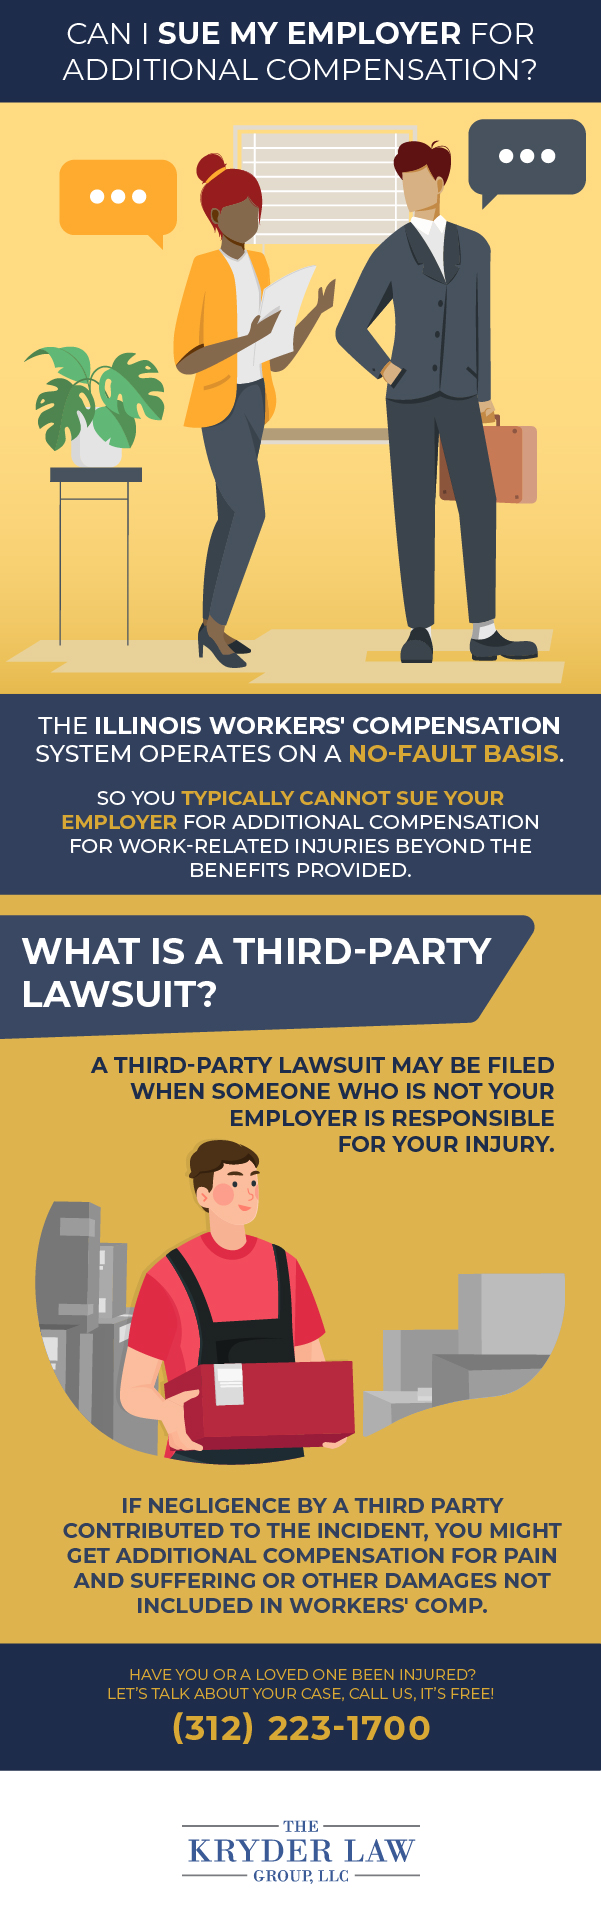 Can I Sue My Employer for Additional Compensation?